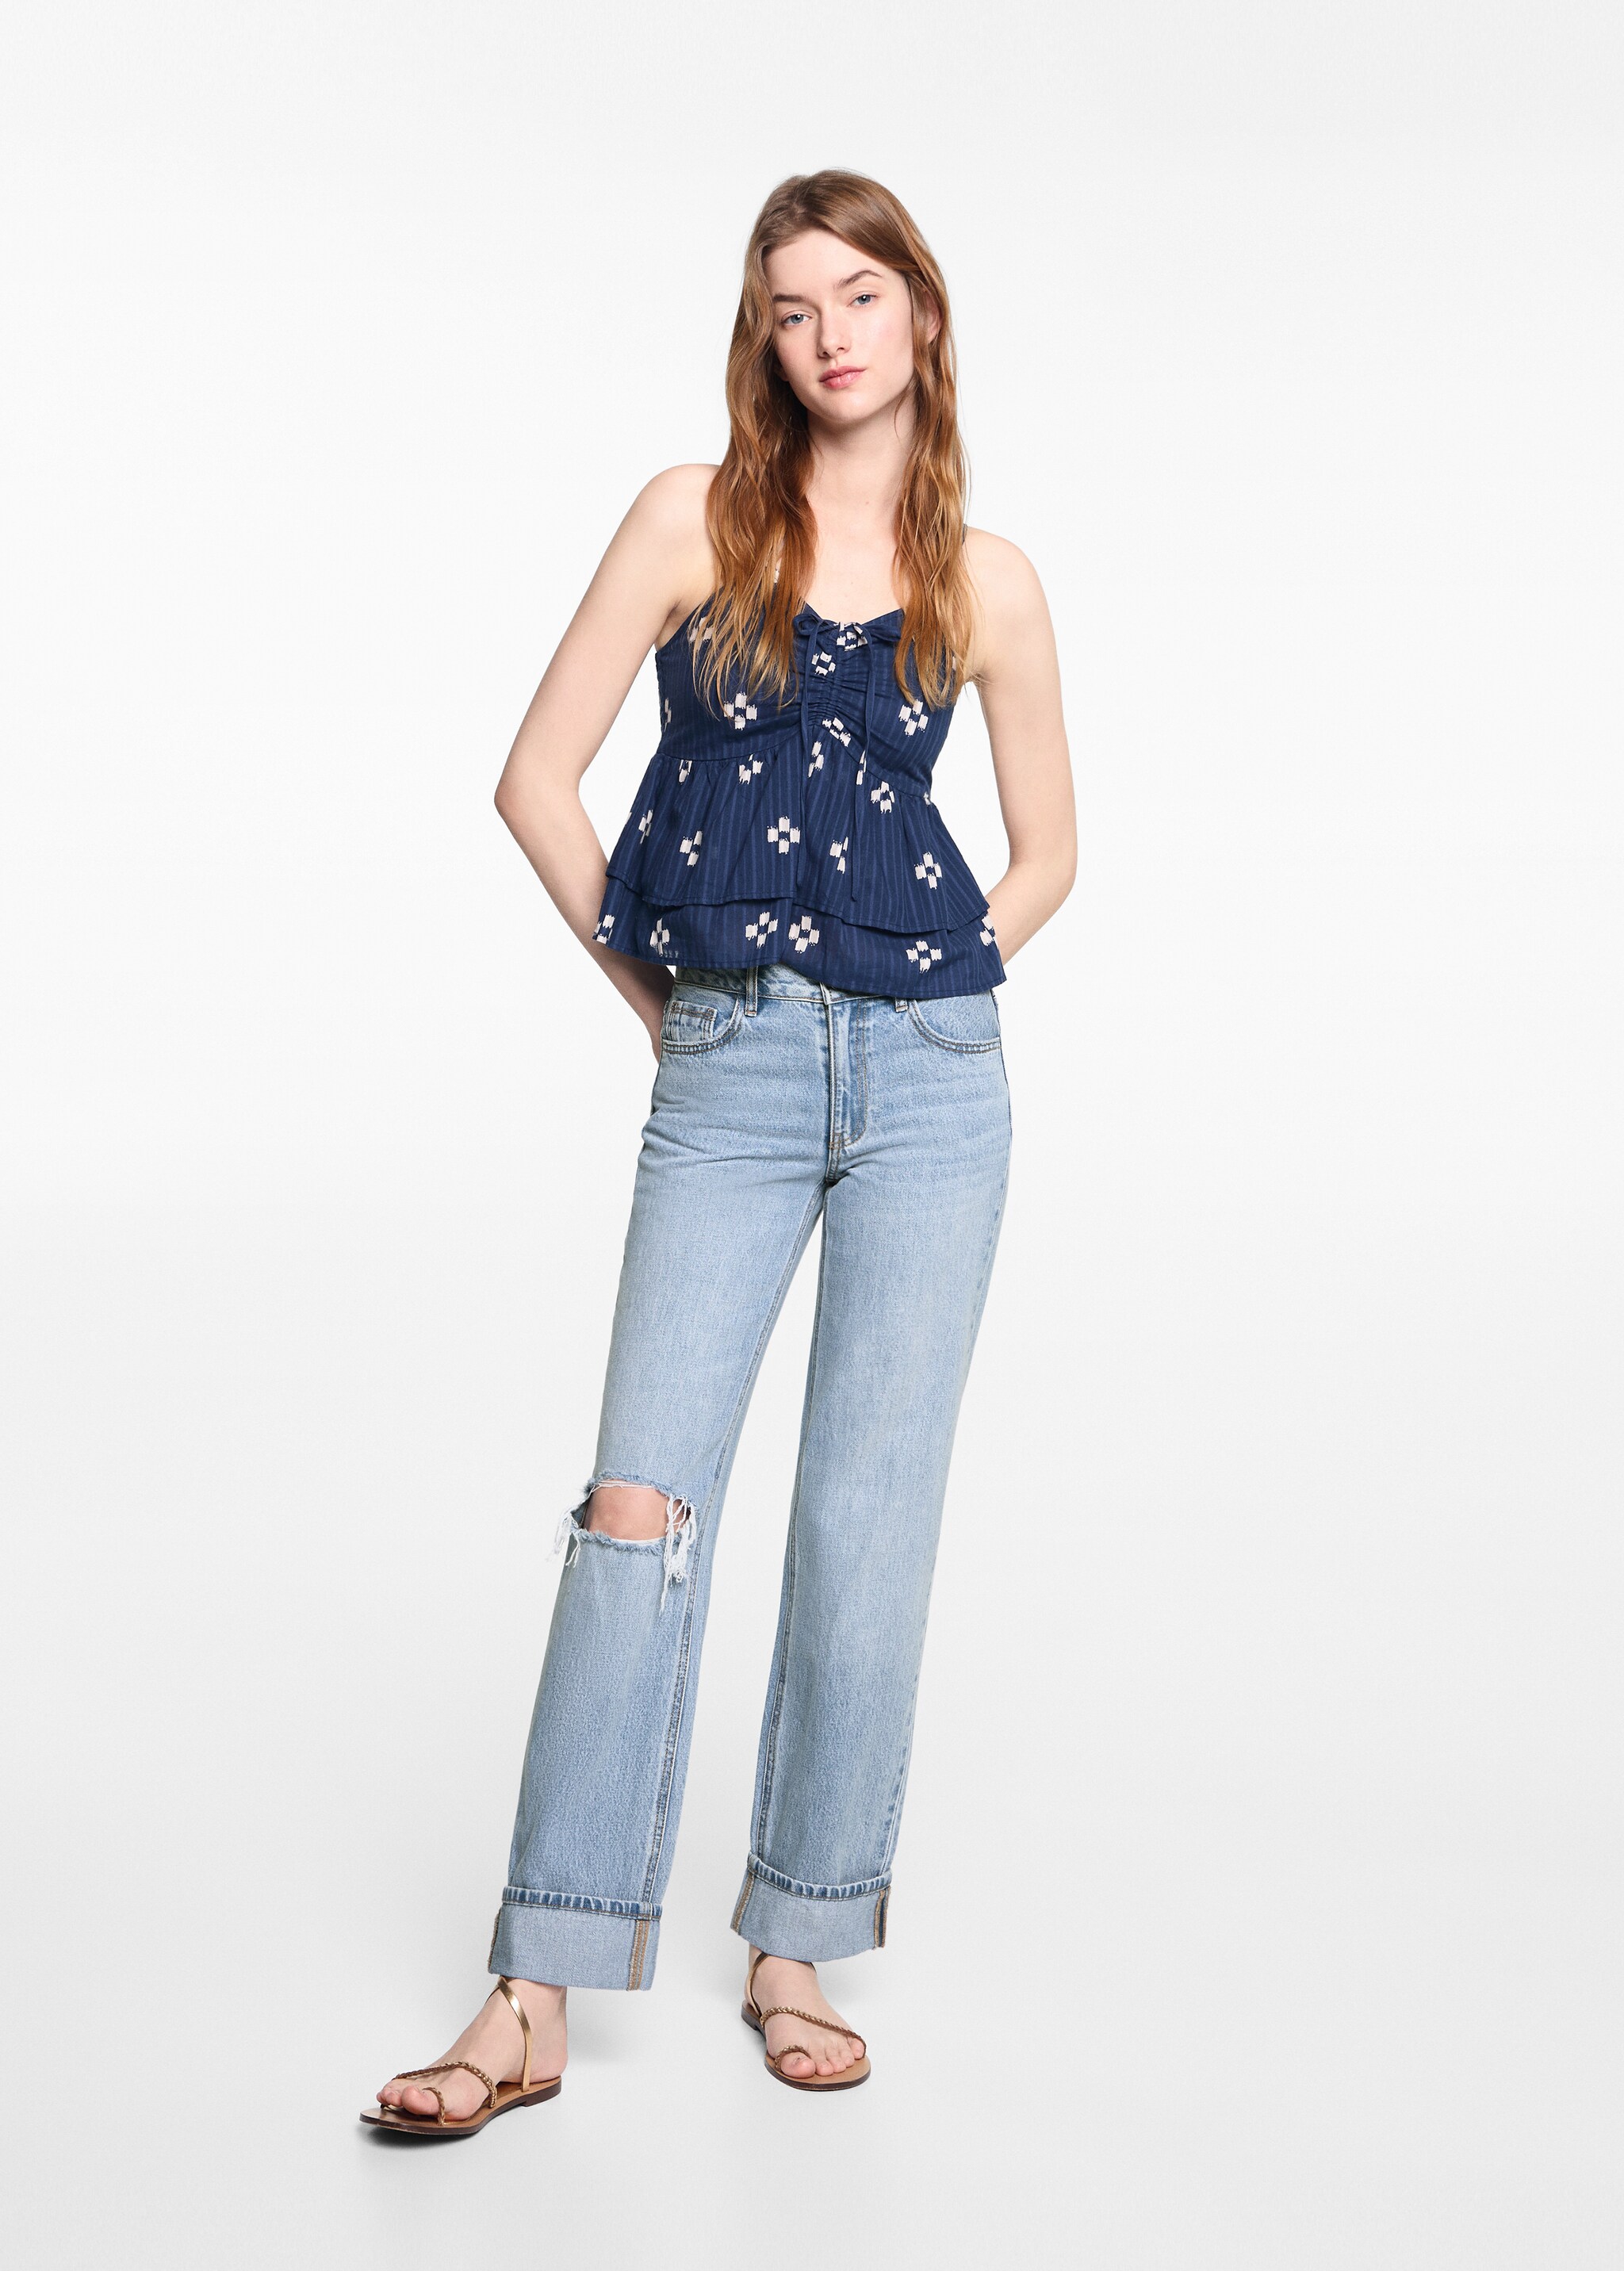 Ripped jeans with turn-up hem - General plane